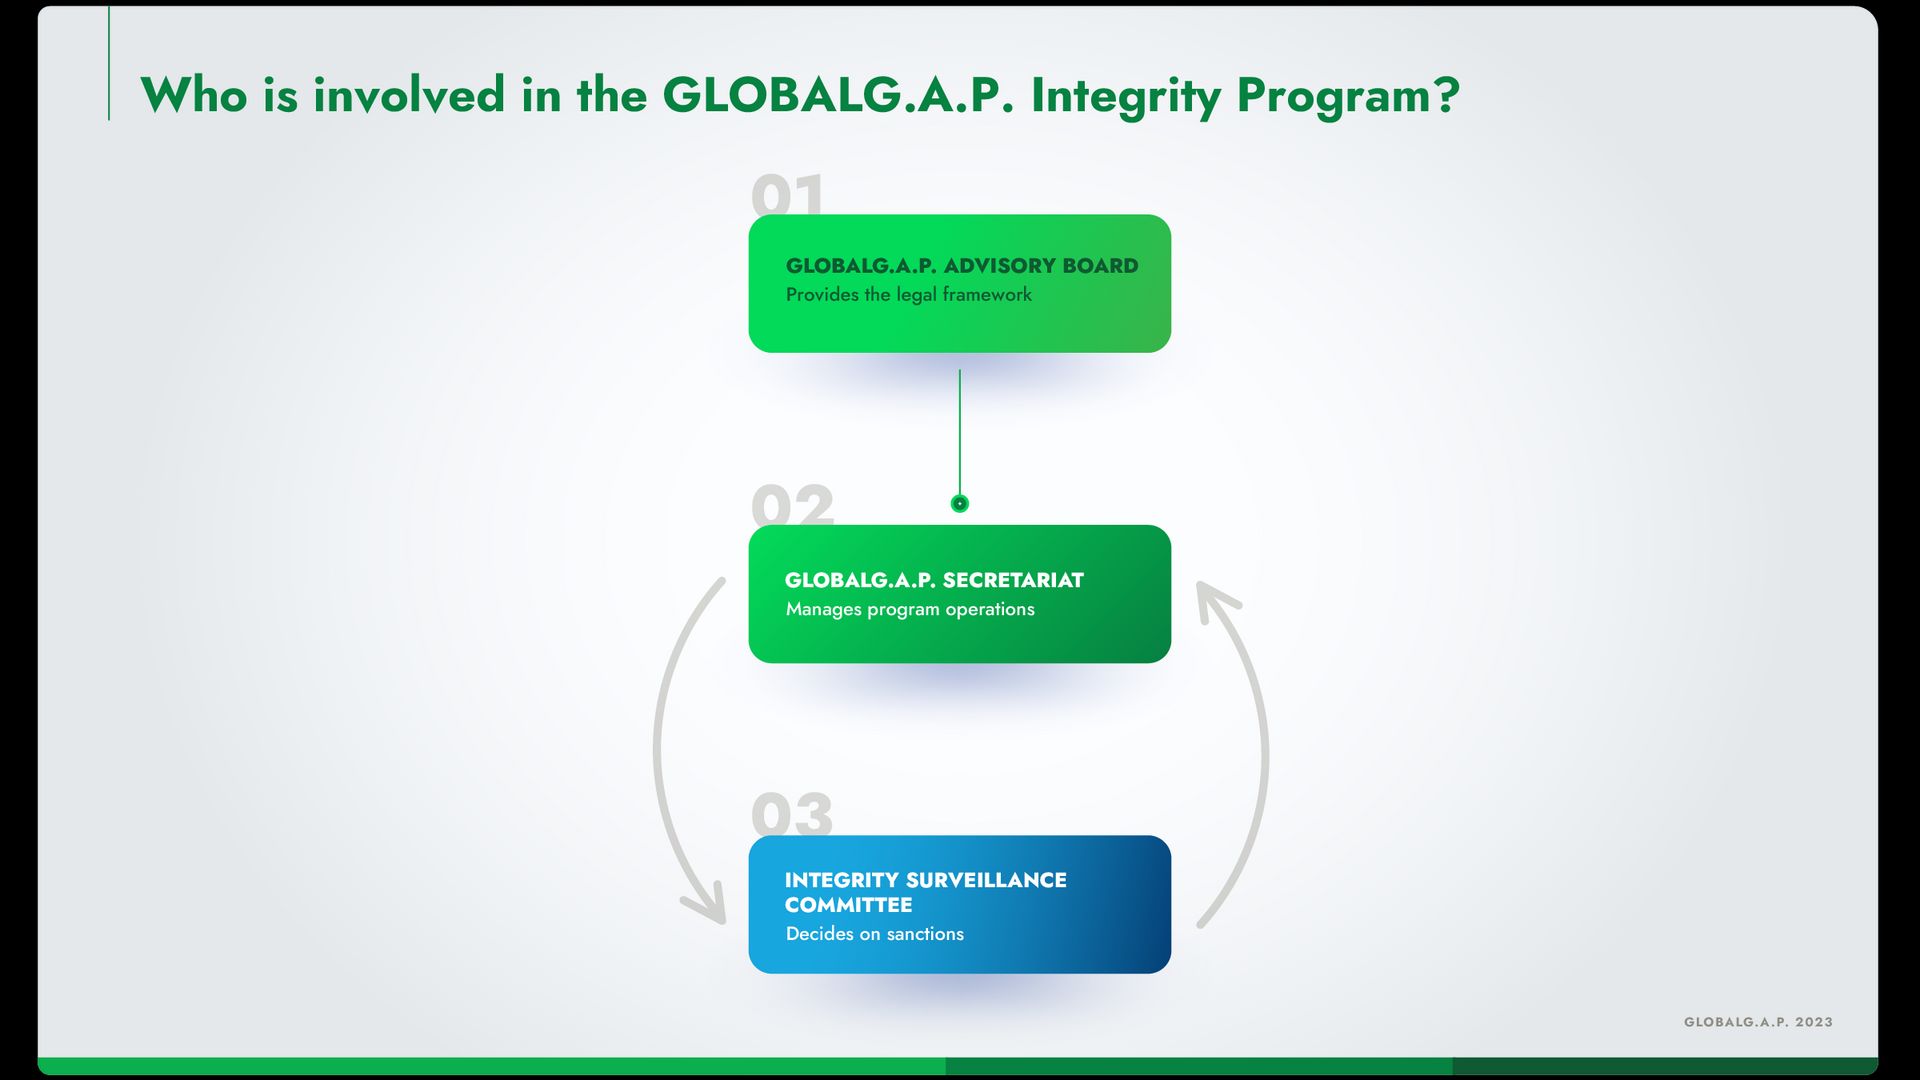 Infographic showing participants in the GLOBALG.A.P. Integrity Program and how they interact